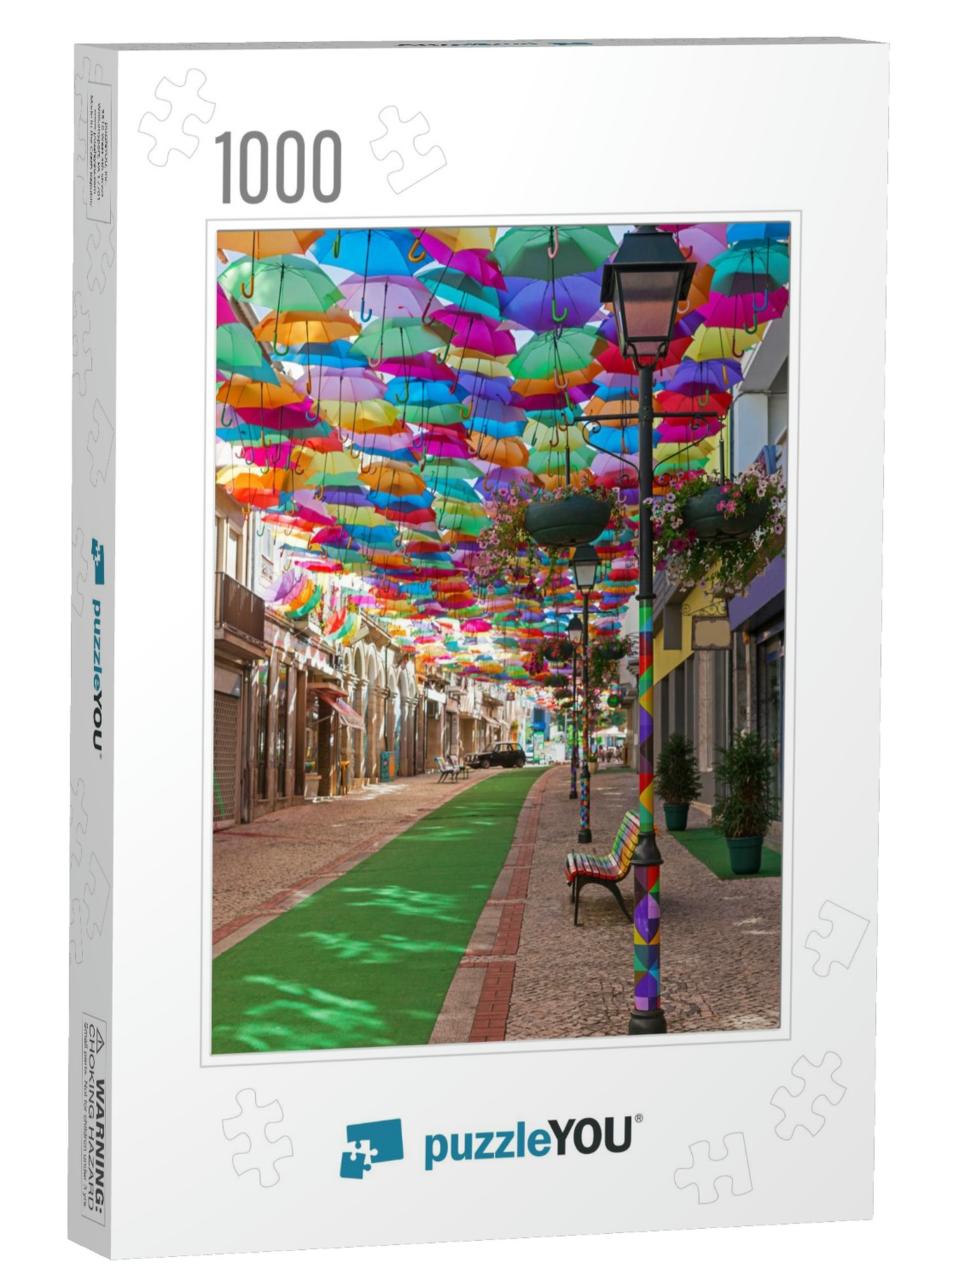 The Sky of Colorful Umbrellas. Street with Umbrellas. Umb... Jigsaw Puzzle with 1000 pieces